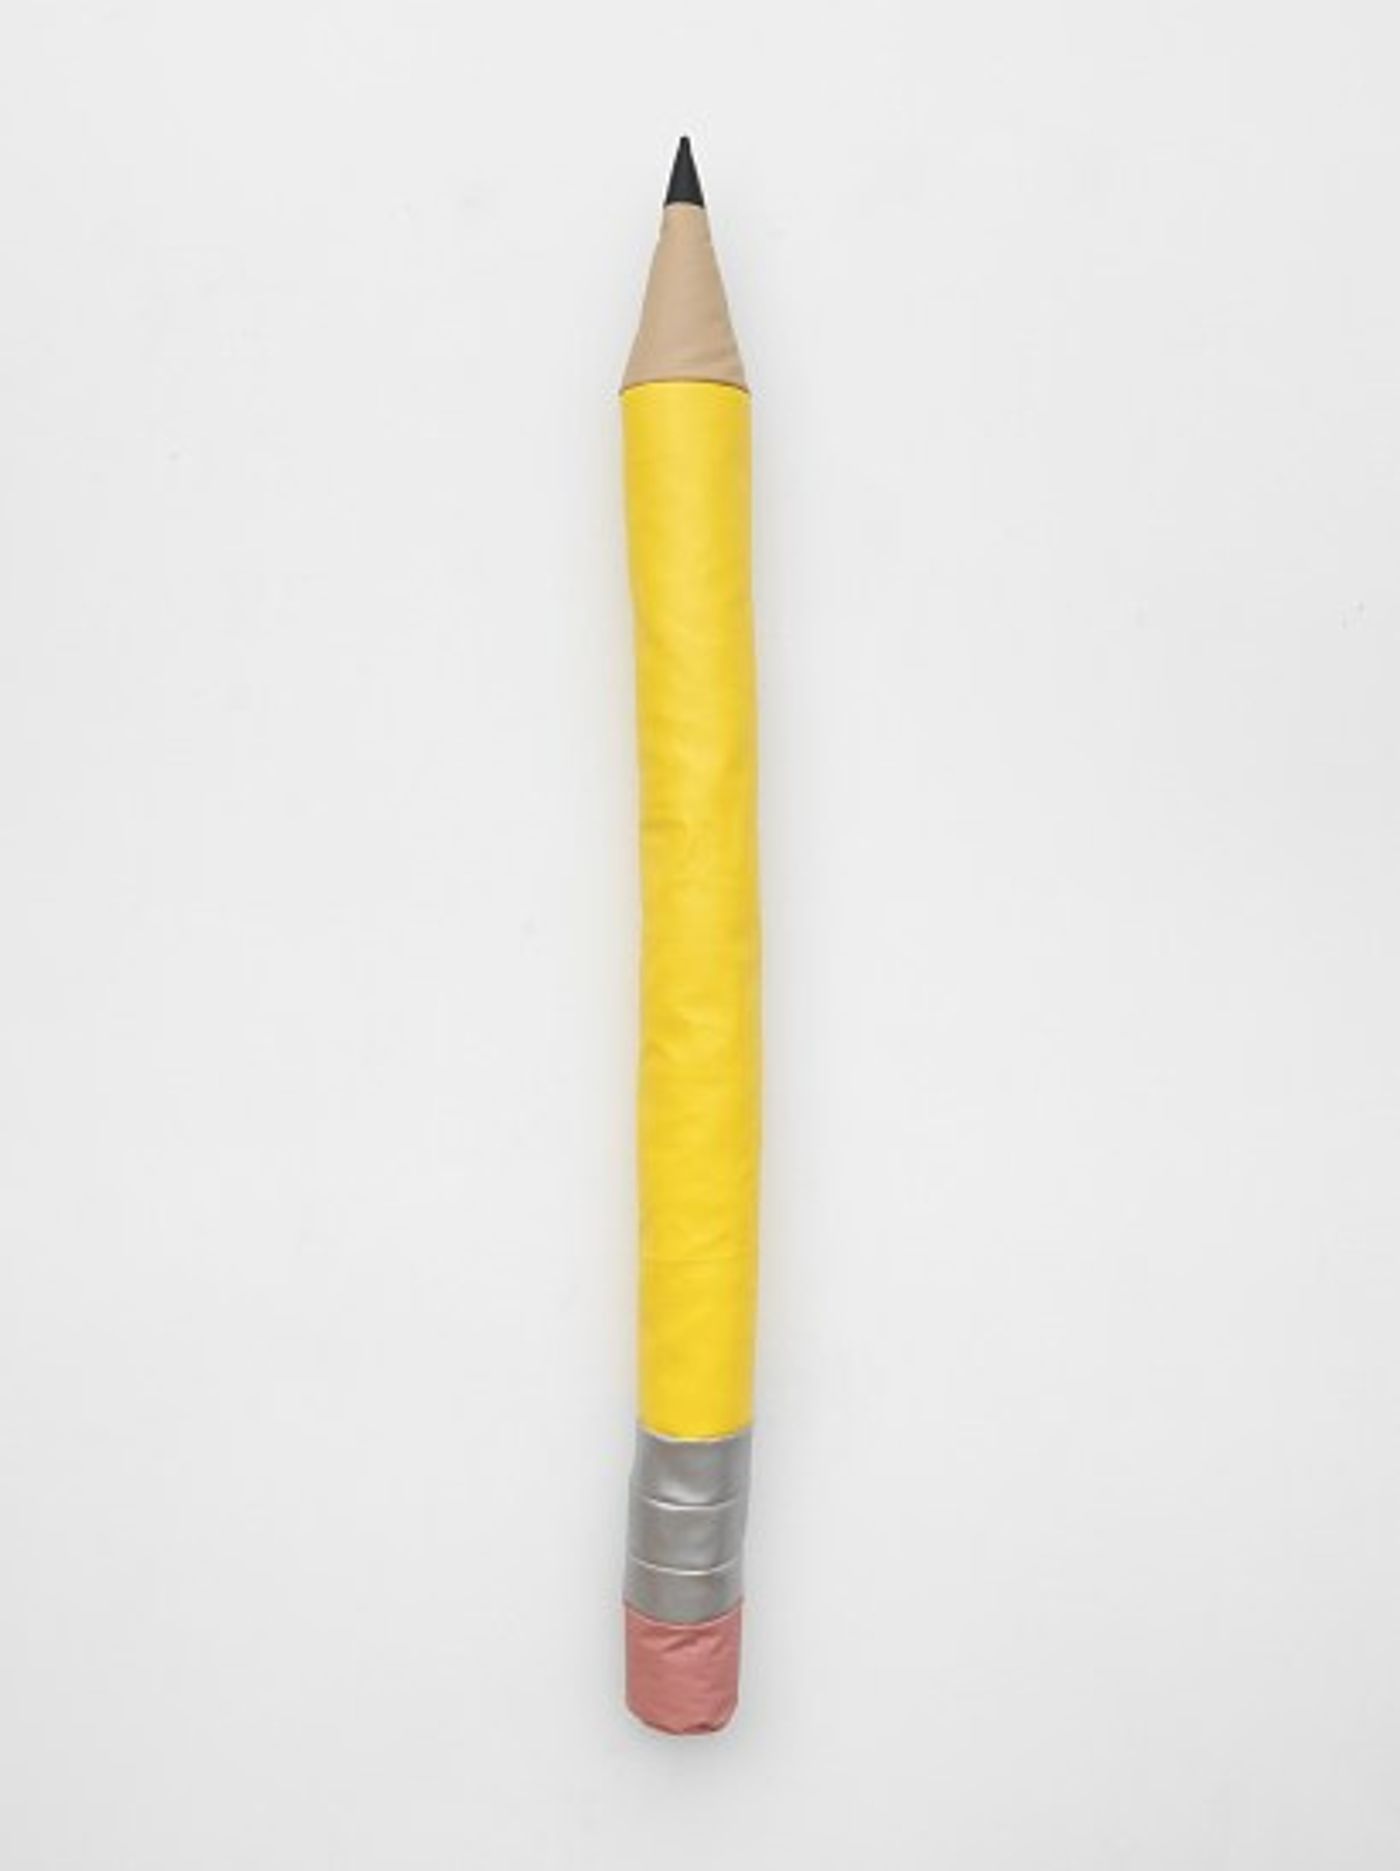 Image of Soft Pencil, 2019: Vinyl and polyfil